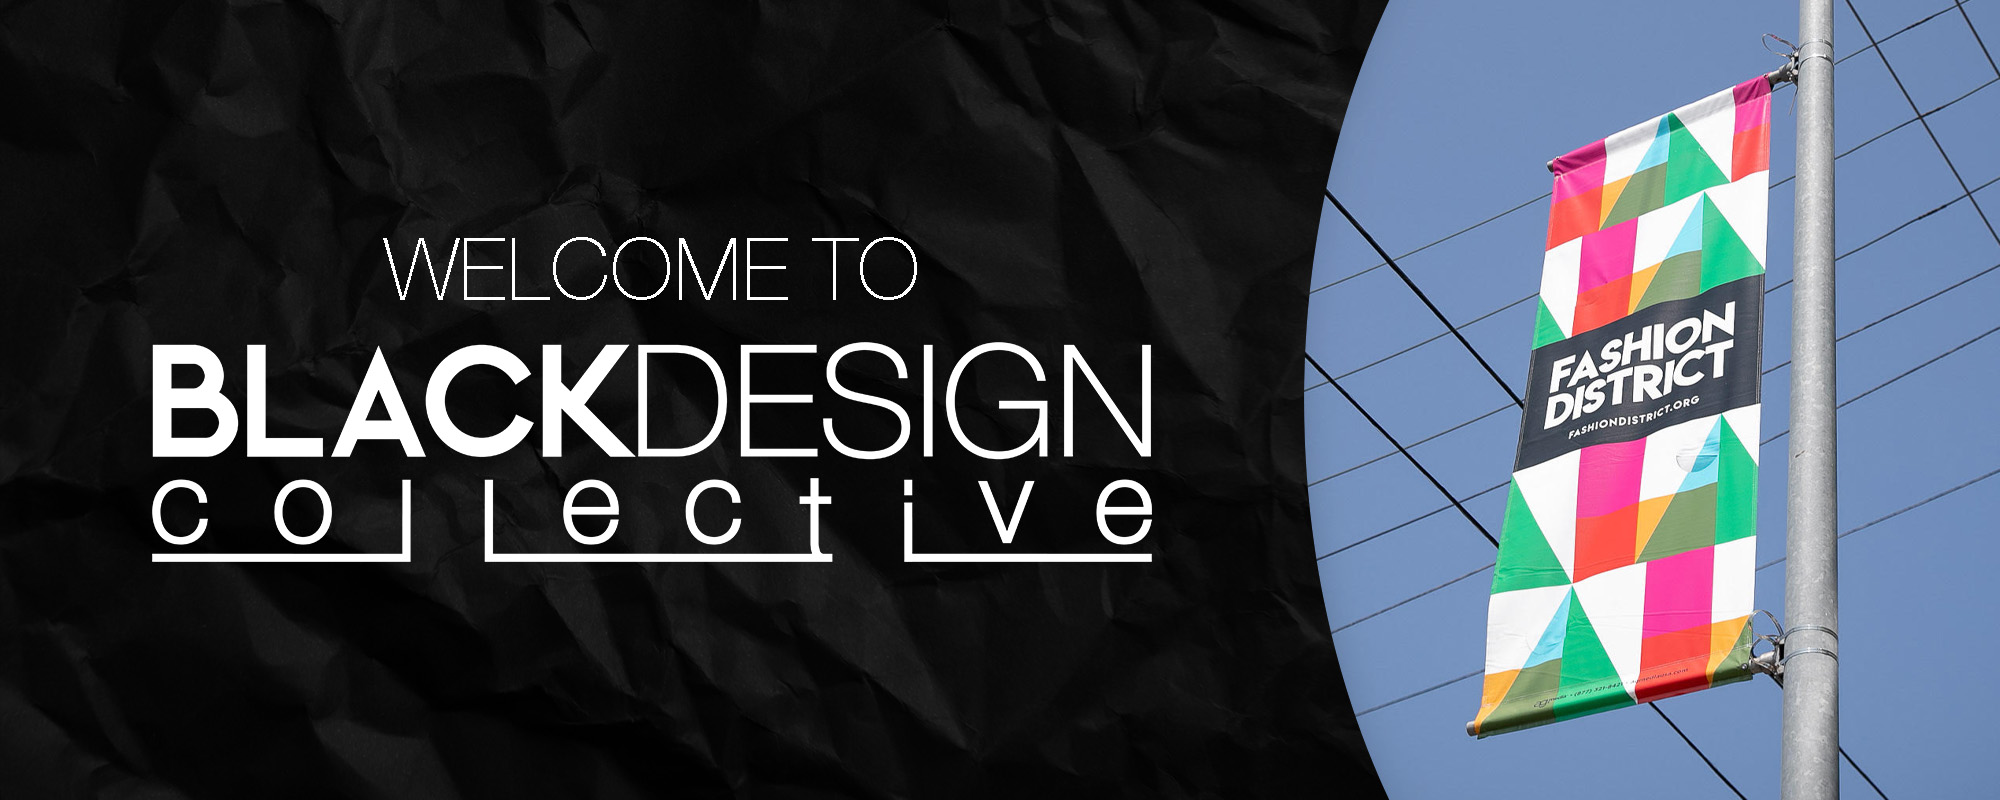 Welcome to The Black Design Collective